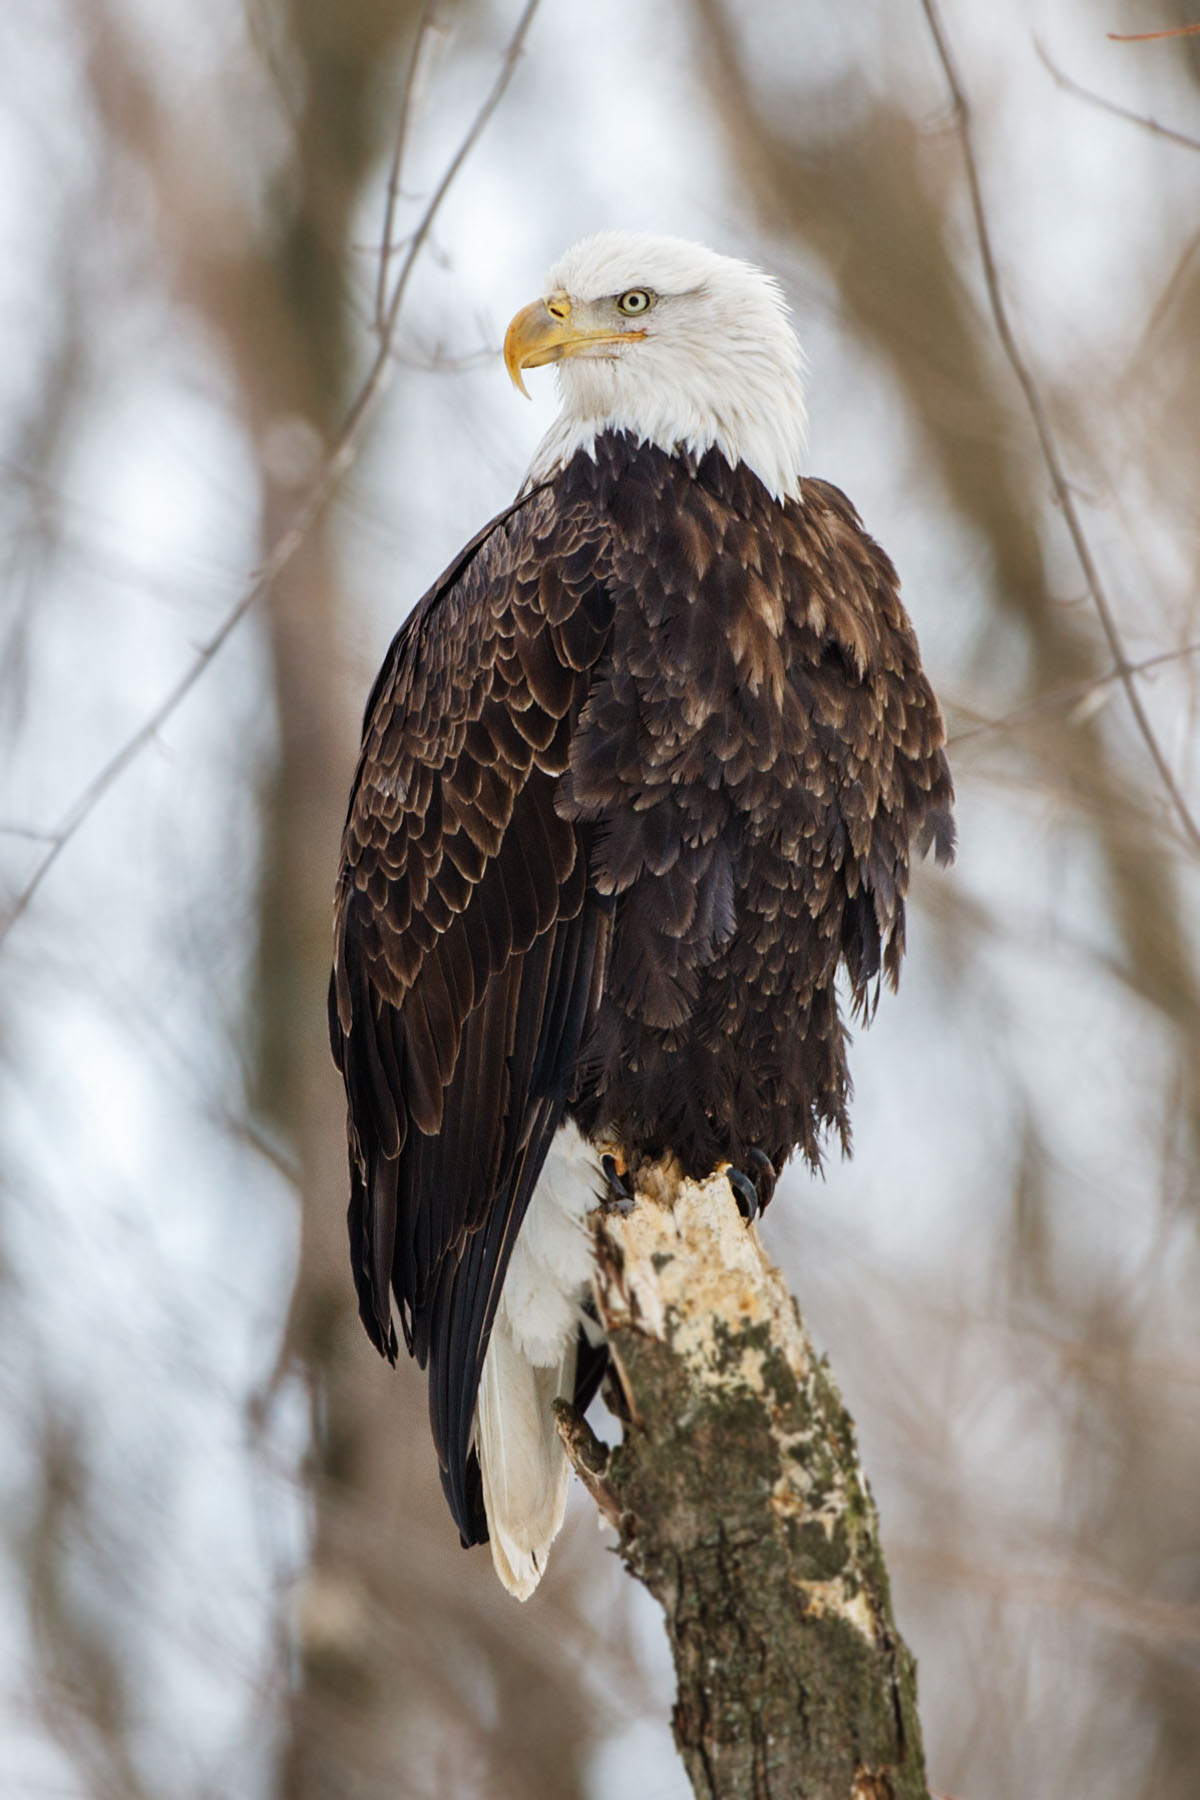 Bald eagle roosting near the Mississippi River, Lock and Dam 18, Illinois.  Click for next photo.